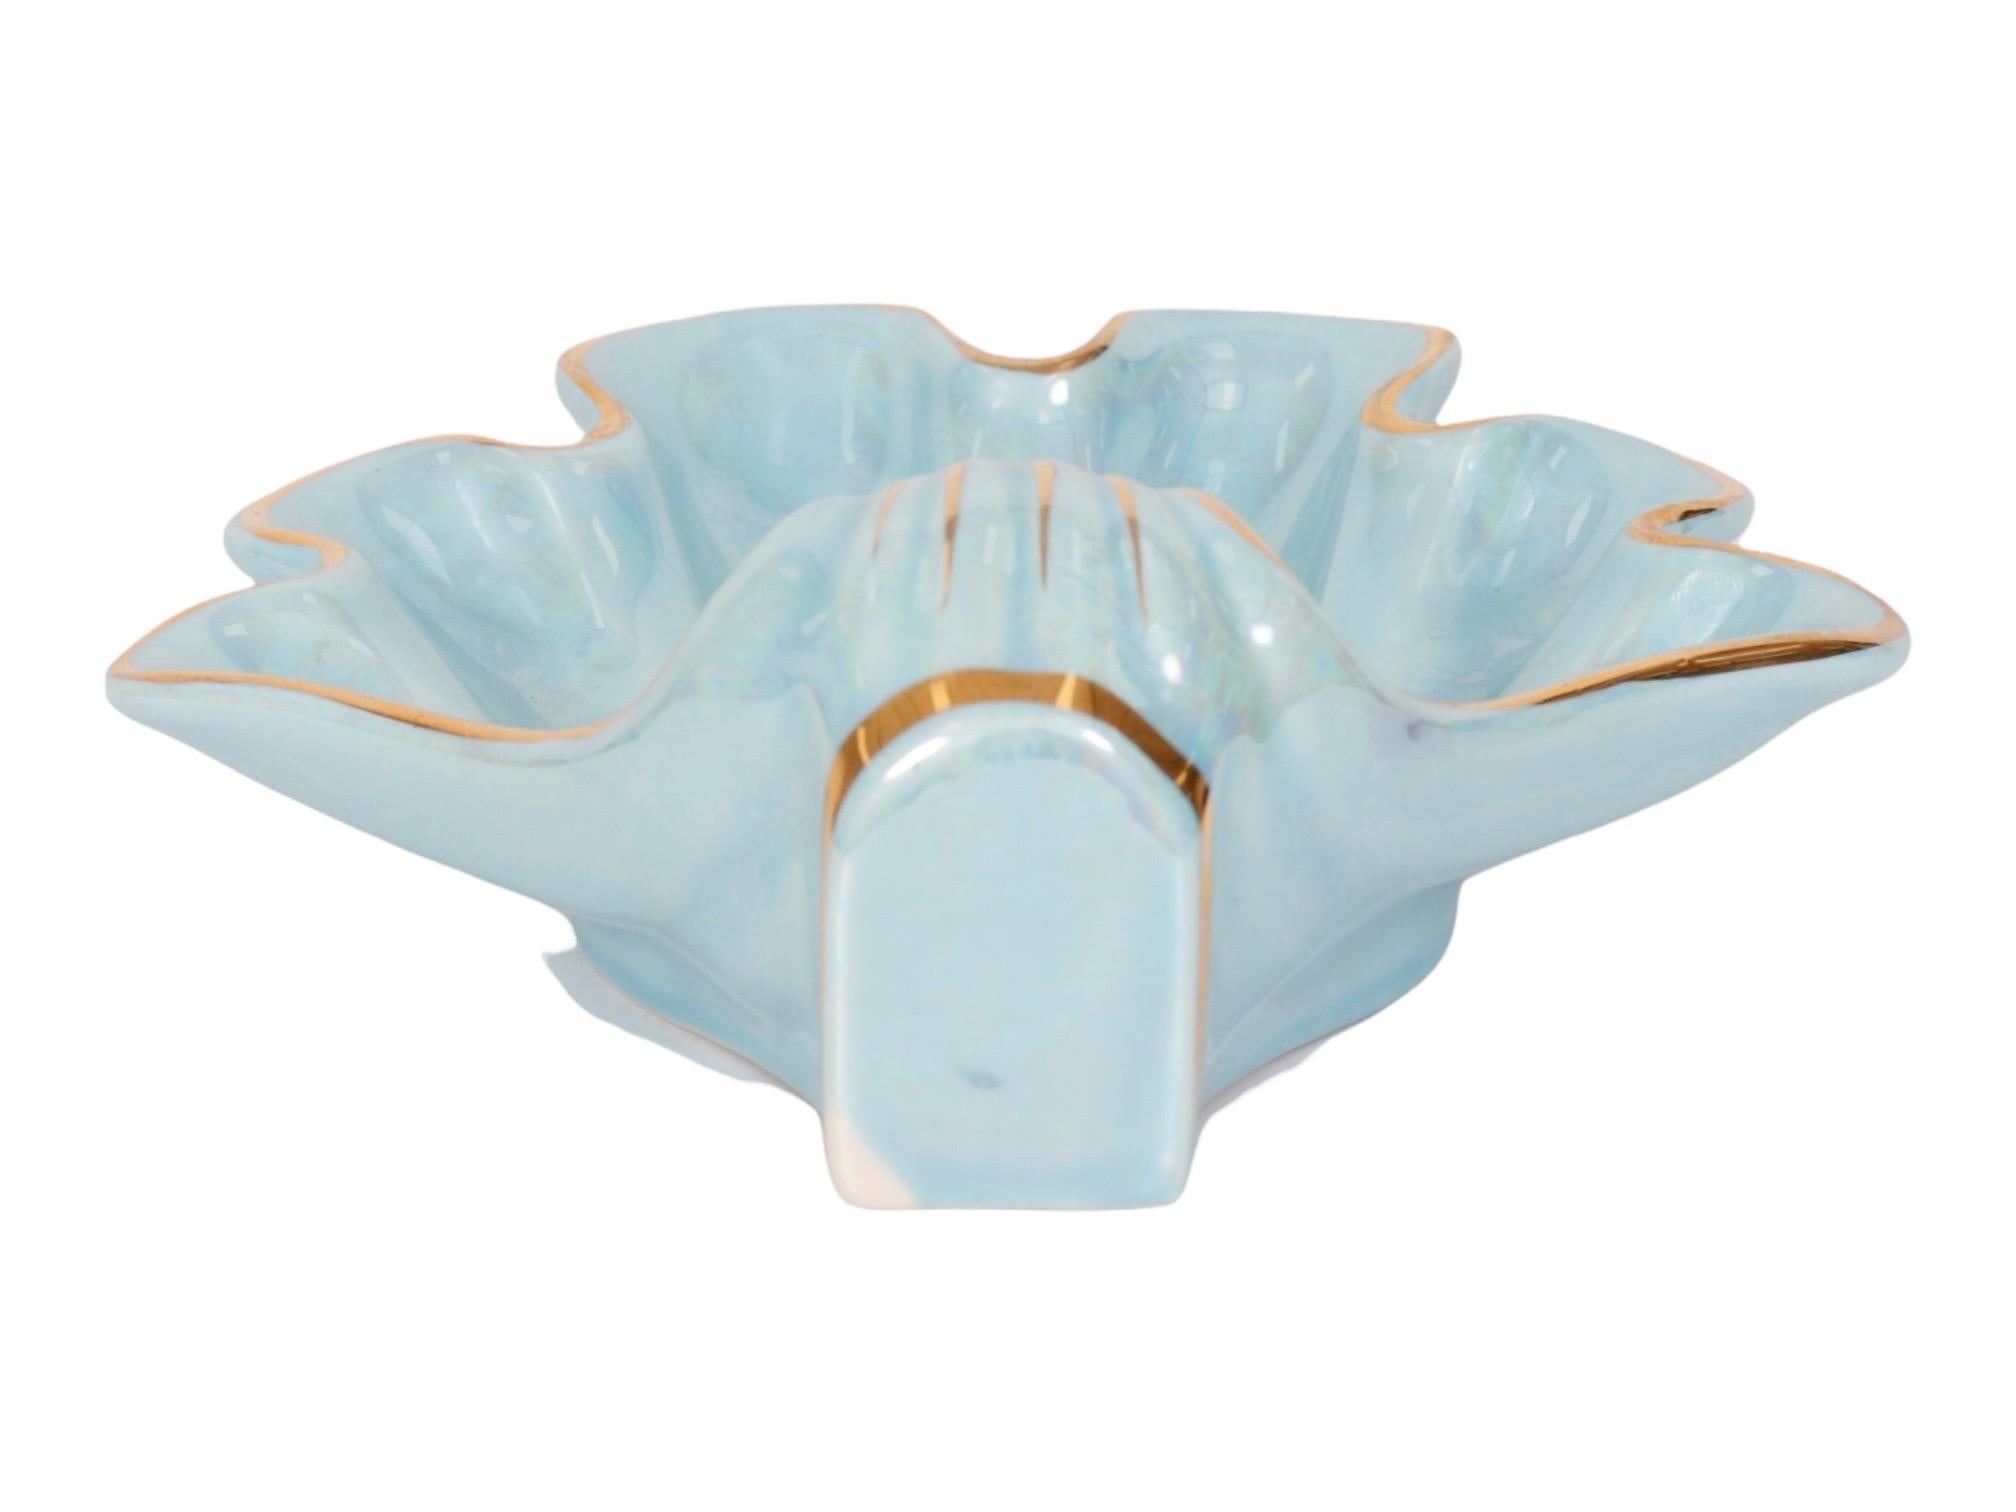 Ceramic Soap Dish in Blue &white Shaped like Scallop Shell Very Useful 